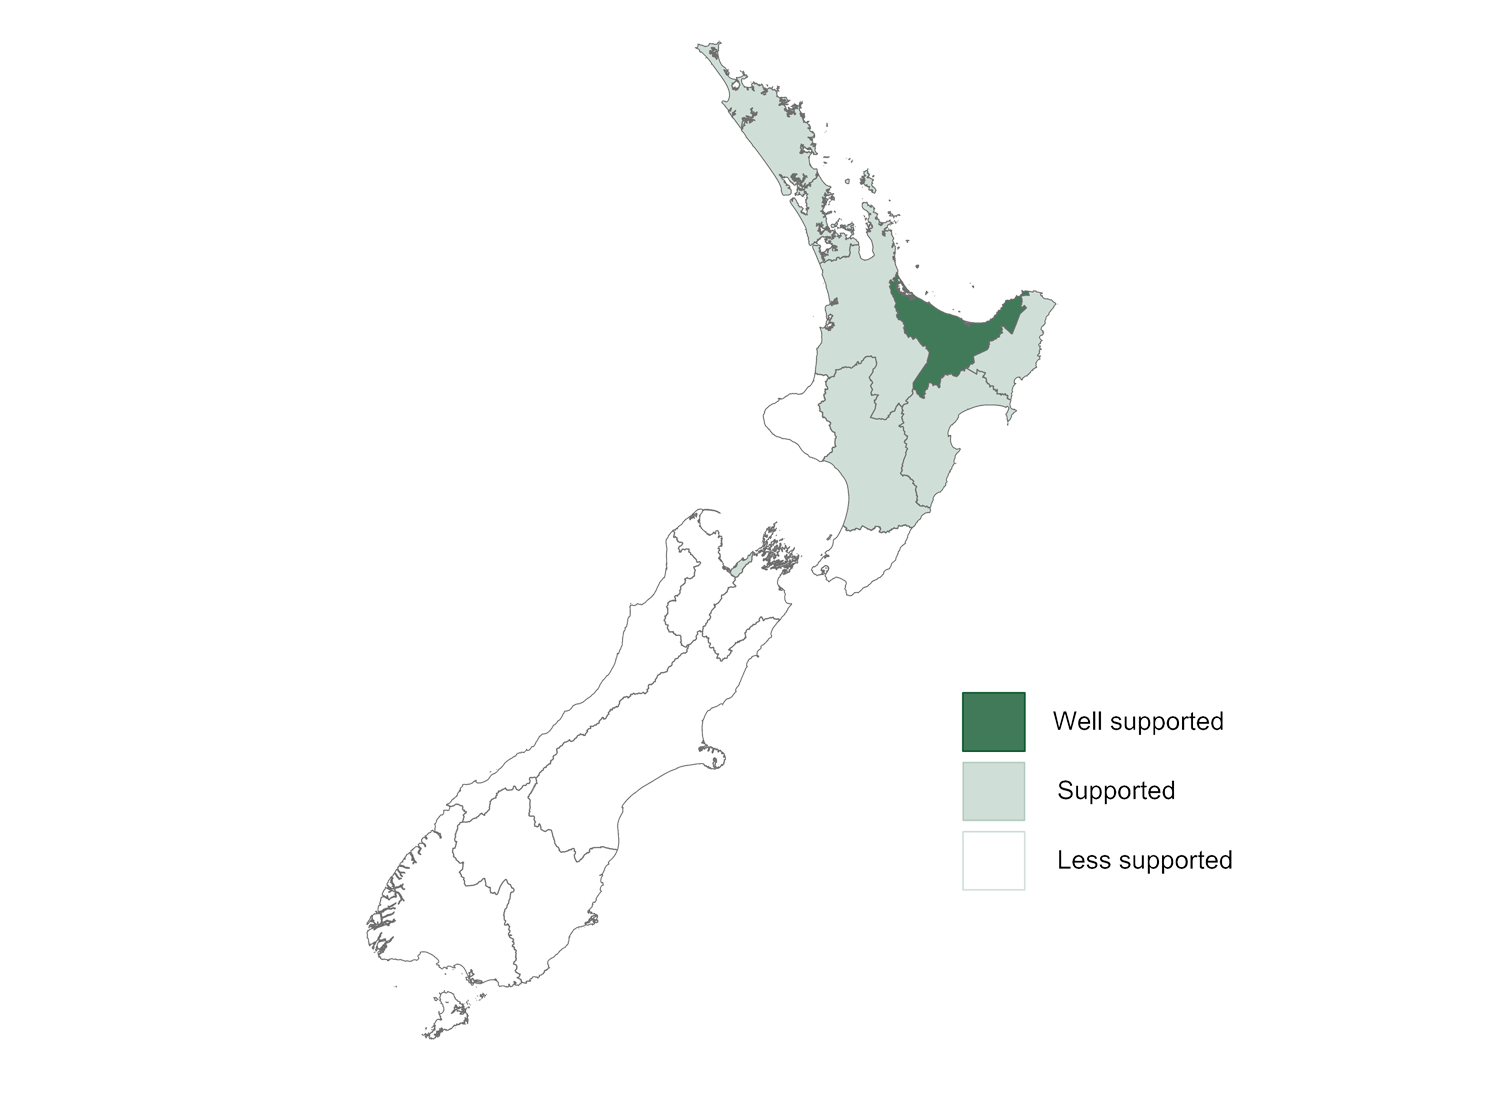 New Zealand map highlighting the best regions for commercial kiwifruit growing.